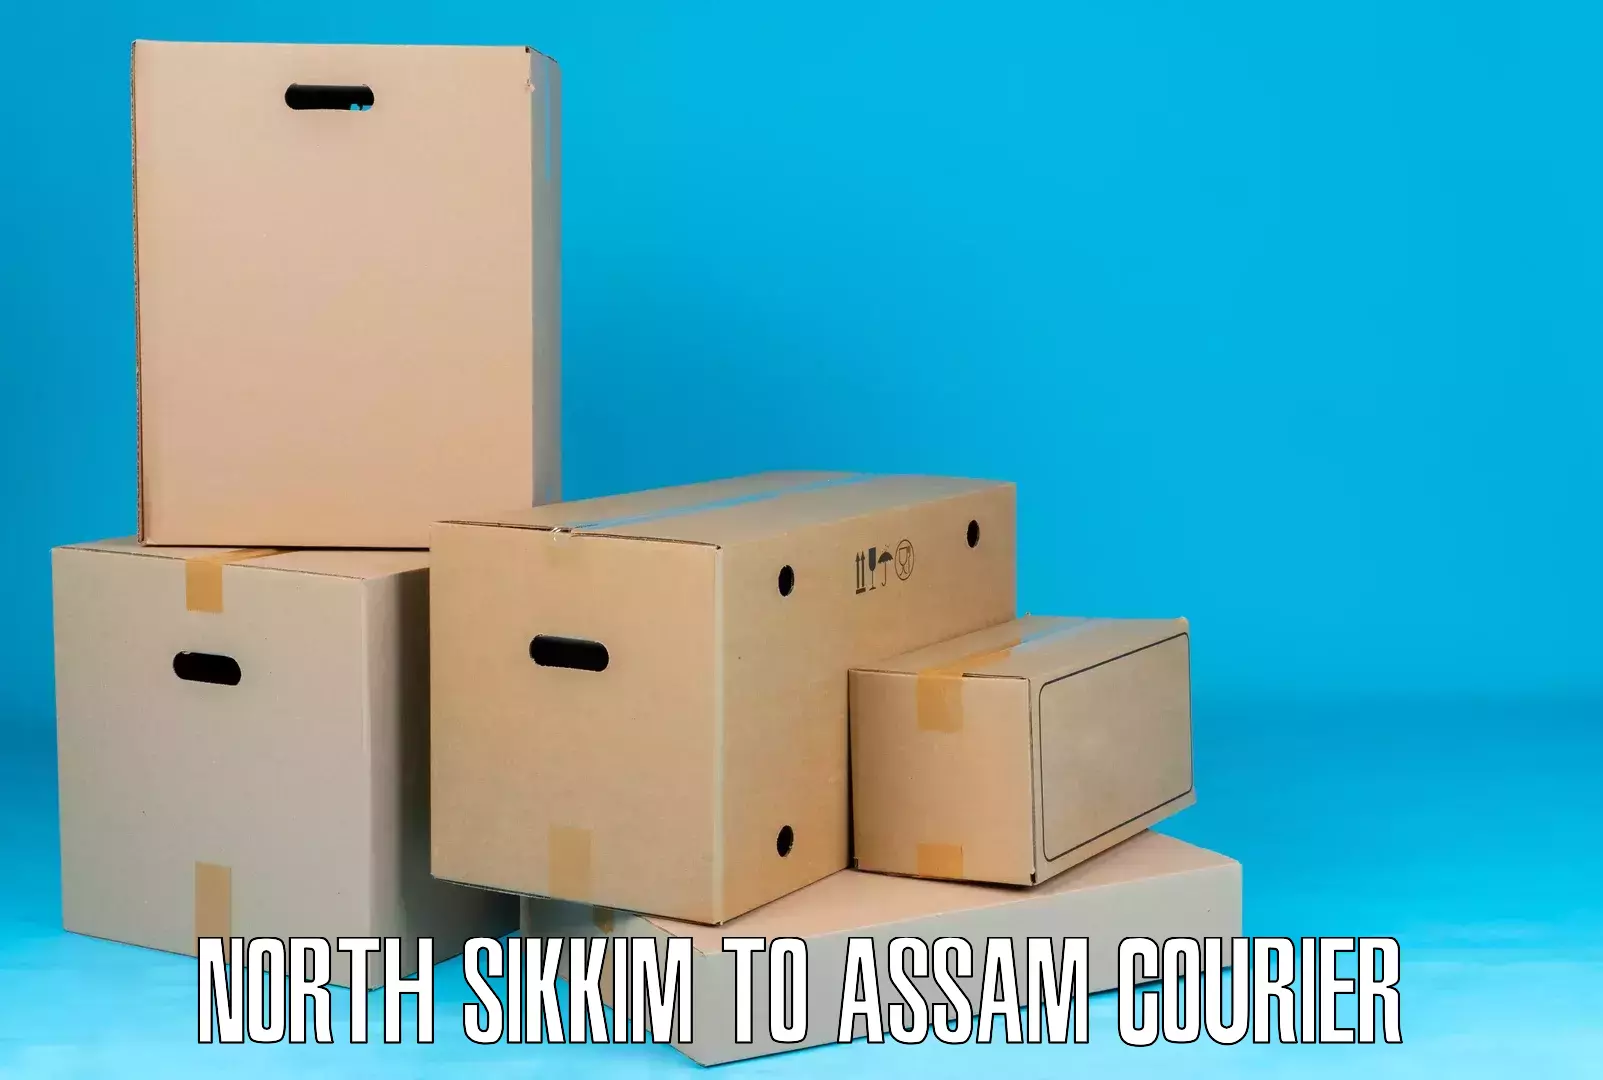 Business shipping needs North Sikkim to Assam